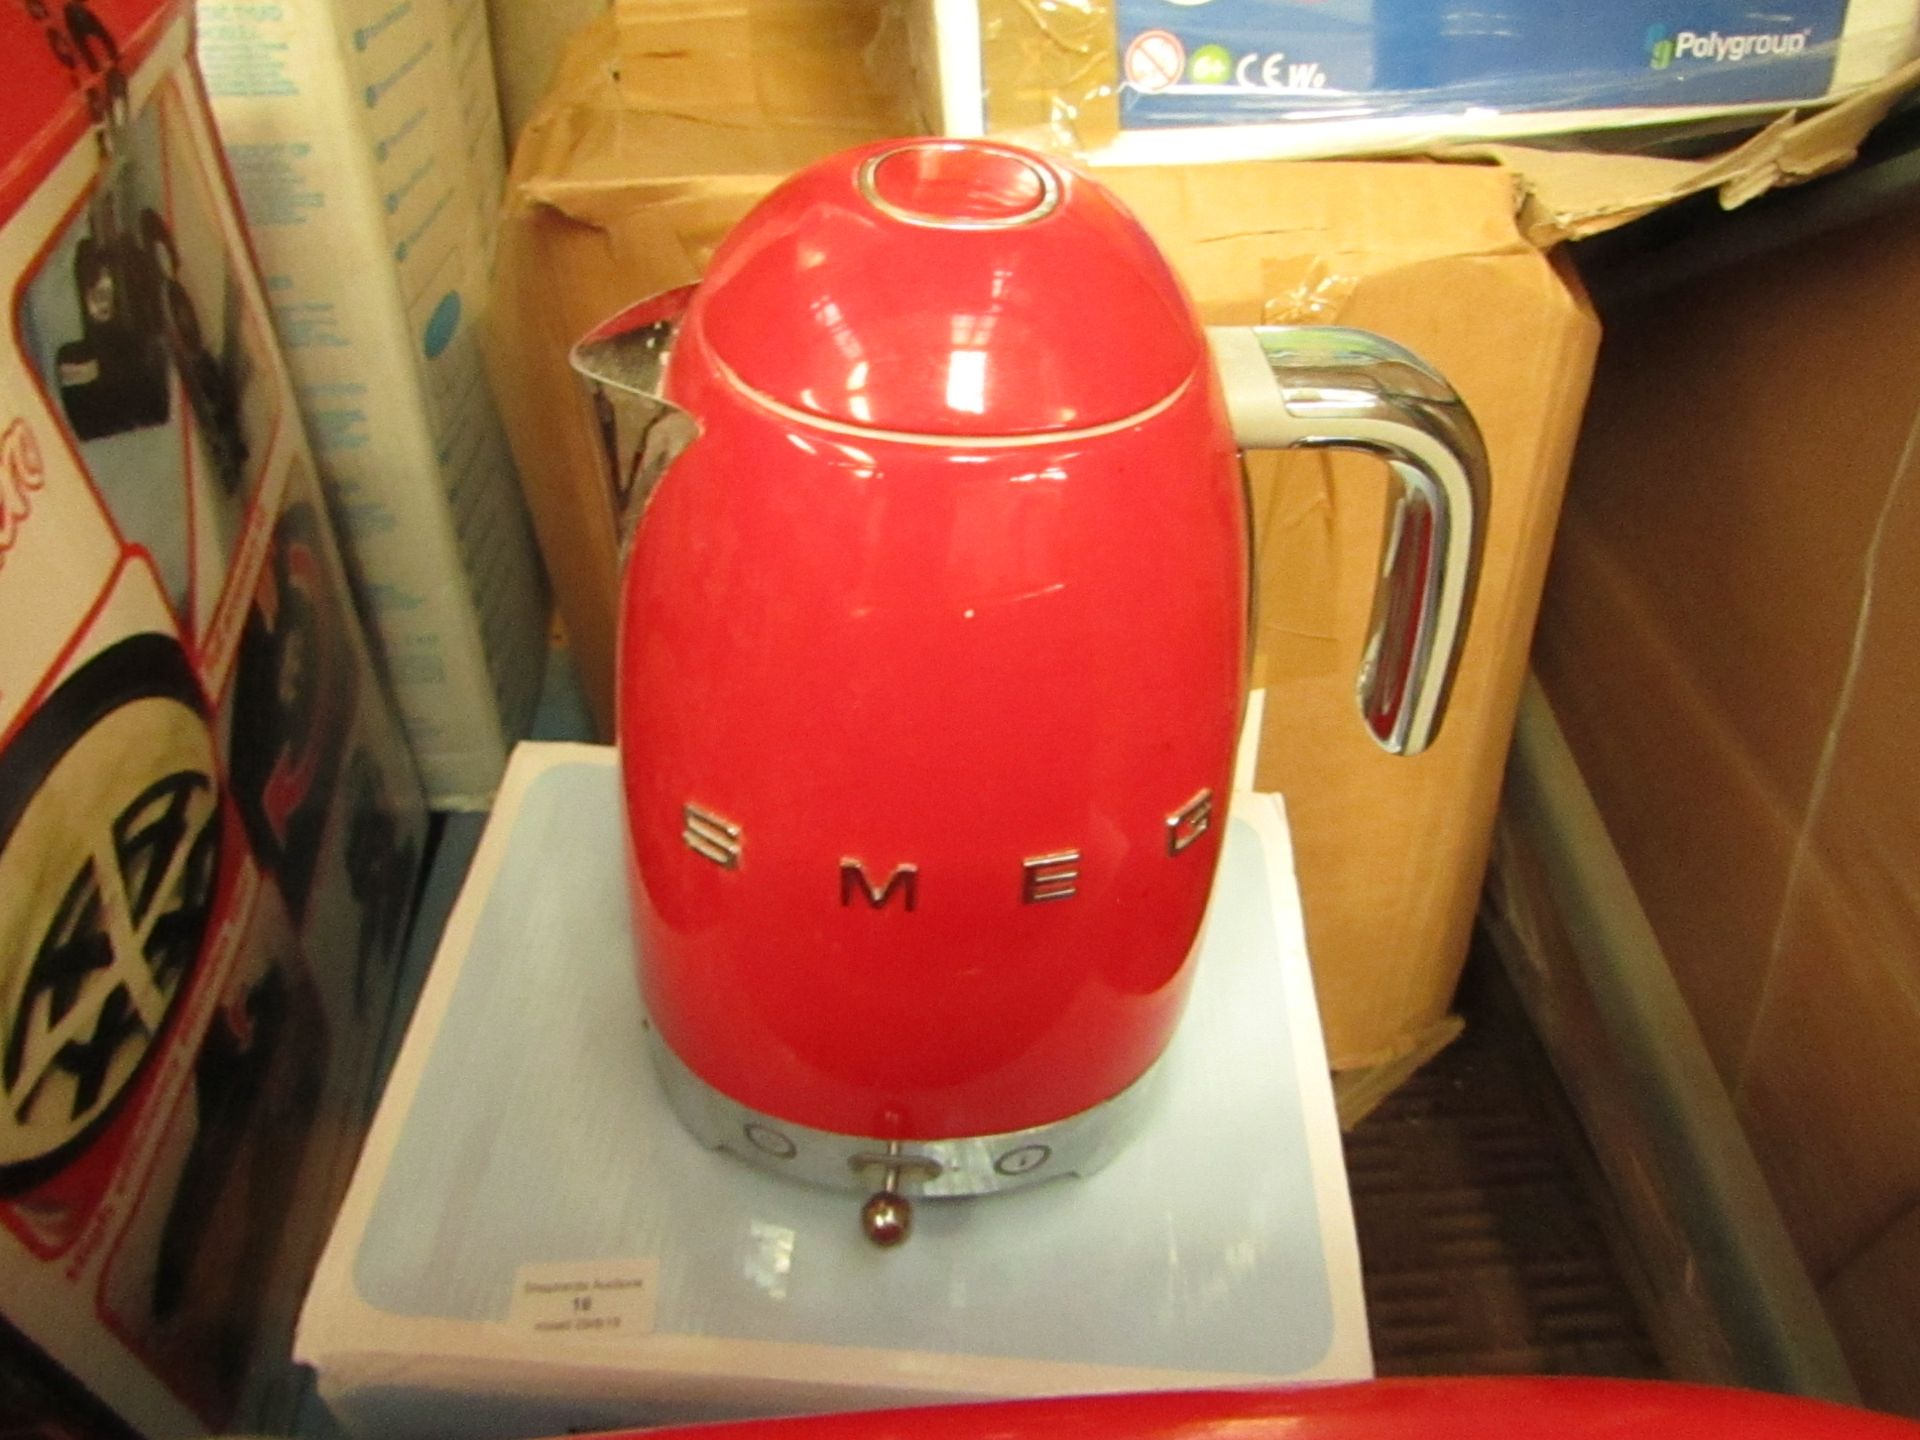 Smeg Red temperature controlled kettle, tested working with original box.